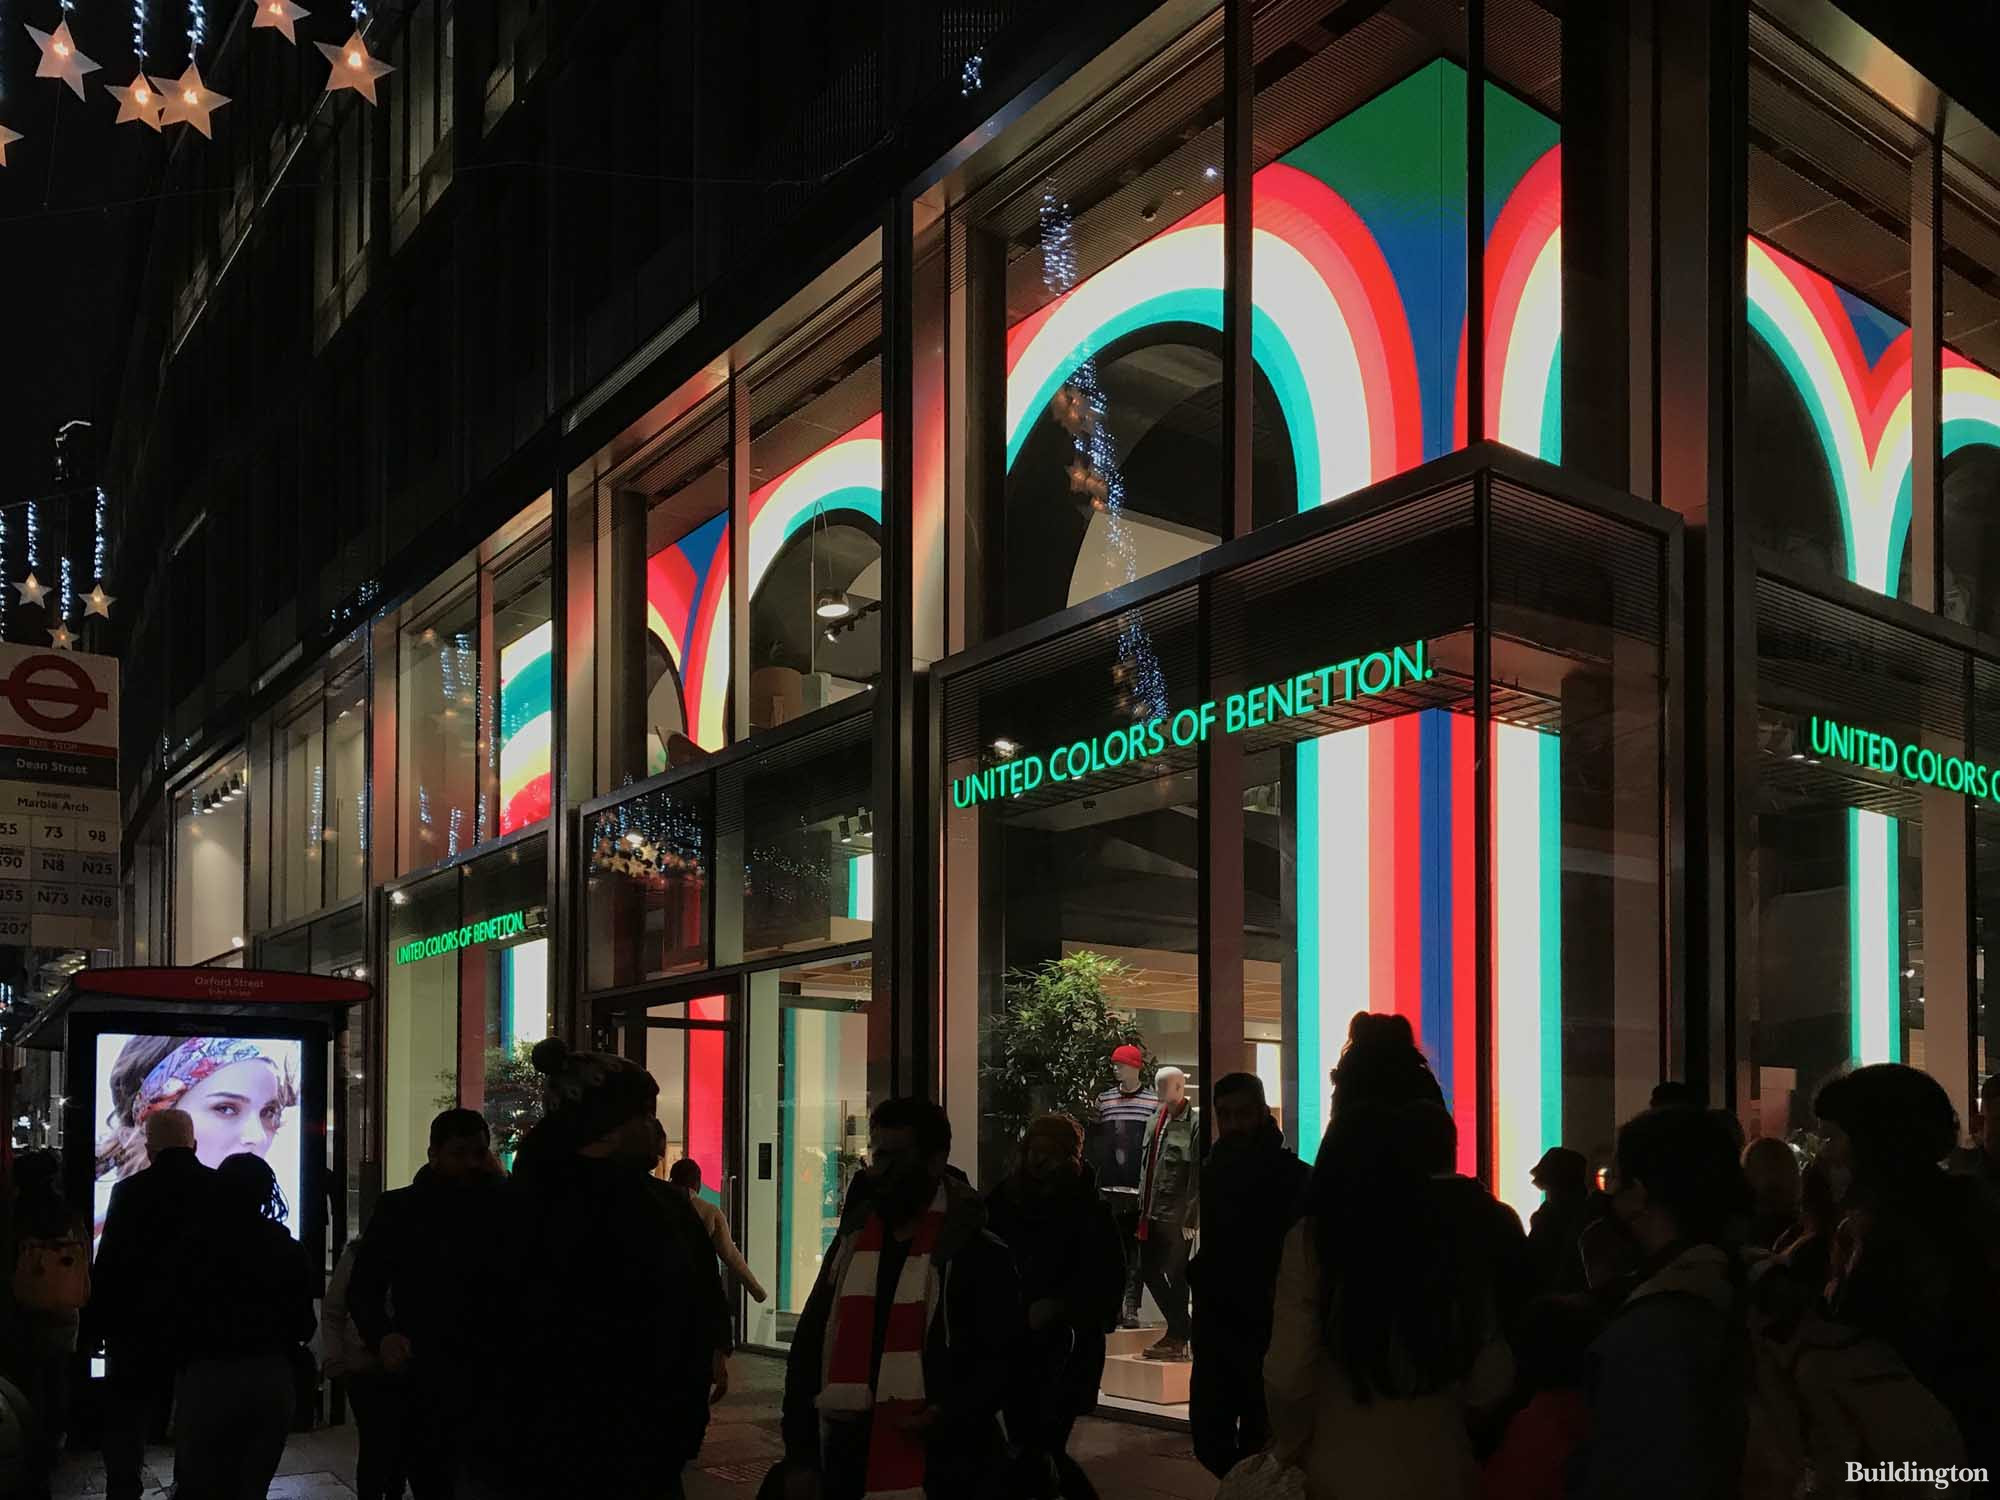 United Colors of Benetton flagship store at 73-88 Oxford Street.